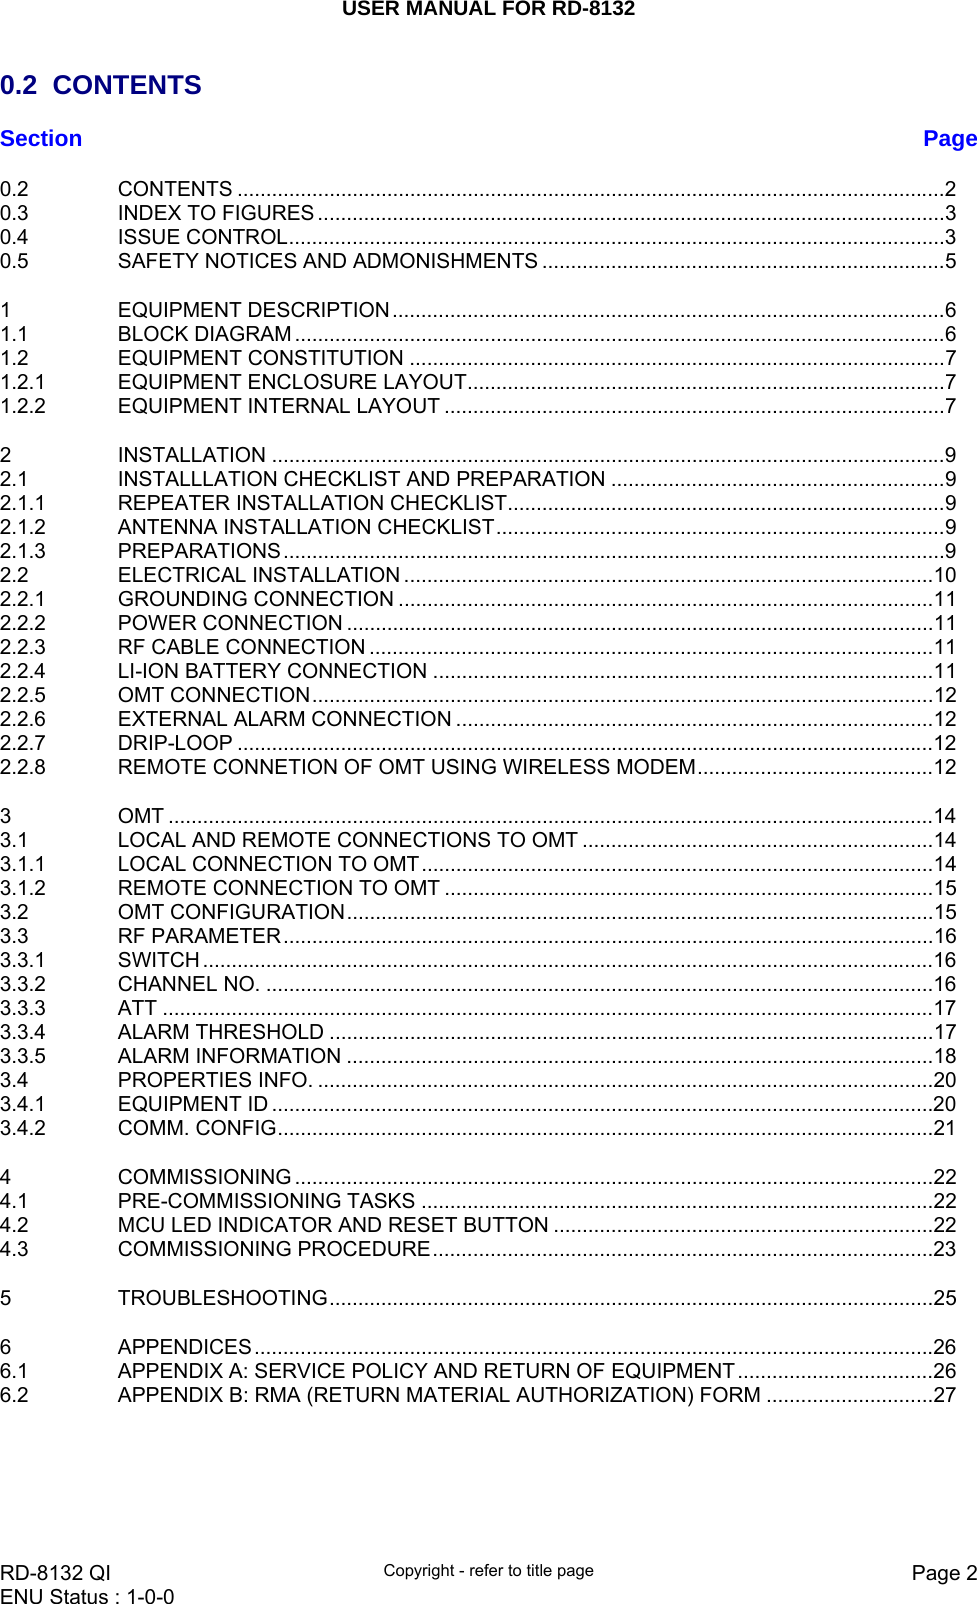 USER MANUAL FOR RD-8132    RD-8132 QI  Copyright - refer to title page  Page 2ENU Status : 1-0-0    0.2 CONTENTS Section  Page0.2 CONTENTS ...........................................................................................................................2 0.3 INDEX TO FIGURES .............................................................................................................3 0.4 ISSUE CONTROL..................................................................................................................3 0.5 SAFETY NOTICES AND ADMONISHMENTS ......................................................................5 1 EQUIPMENT DESCRIPTION................................................................................................6 1.1 BLOCK DIAGRAM .................................................................................................................6 1.2 EQUIPMENT CONSTITUTION .............................................................................................7 1.2.1 EQUIPMENT ENCLOSURE LAYOUT...................................................................................7 1.2.2 EQUIPMENT INTERNAL LAYOUT .......................................................................................7 2 INSTALLATION .....................................................................................................................9 2.1 INSTALLLATION CHECKLIST AND PREPARATION ..........................................................9 2.1.1 REPEATER INSTALLATION CHECKLIST............................................................................9 2.1.2 ANTENNA INSTALLATION CHECKLIST..............................................................................9 2.1.3 PREPARATIONS...................................................................................................................9 2.2 ELECTRICAL INSTALLATION ............................................................................................10 2.2.1 GROUNDING CONNECTION .............................................................................................11 2.2.2 POWER CONNECTION ......................................................................................................11 2.2.3 RF CABLE CONNECTION ..................................................................................................11 2.2.4 LI-ION BATTERY CONNECTION .......................................................................................11 2.2.5 OMT CONNECTION............................................................................................................12 2.2.6 EXTERNAL ALARM CONNECTION ...................................................................................12 2.2.7 DRIP-LOOP .........................................................................................................................12 2.2.8 REMOTE CONNETION OF OMT USING WIRELESS MODEM.........................................12 3 OMT .....................................................................................................................................14 3.1 LOCAL AND REMOTE CONNECTIONS TO OMT .............................................................14 3.1.1 LOCAL CONNECTION TO OMT.........................................................................................14 3.1.2 REMOTE CONNECTION TO OMT .....................................................................................15 3.2 OMT CONFIGURATION......................................................................................................15 3.3 RF PARAMETER.................................................................................................................16 3.3.1 SWITCH ...............................................................................................................................16 3.3.2 CHANNEL NO. ....................................................................................................................16 3.3.3 ATT ......................................................................................................................................17 3.3.4 ALARM THRESHOLD .........................................................................................................17 3.3.5 ALARM INFORMATION ......................................................................................................18 3.4 PROPERTIES INFO. ...........................................................................................................20 3.4.1 EQUIPMENT ID ...................................................................................................................20 3.4.2 COMM. CONFIG..................................................................................................................21 4 COMMISSIONING ...............................................................................................................22 4.1 PRE-COMMISSIONING TASKS .........................................................................................22 4.2 MCU LED INDICATOR AND RESET BUTTON ..................................................................22 4.3 COMMISSIONING PROCEDURE.......................................................................................23 5 TROUBLESHOOTING.........................................................................................................25 6 APPENDICES......................................................................................................................26 6.1 APPENDIX A: SERVICE POLICY AND RETURN OF EQUIPMENT..................................26 6.2 APPENDIX B: RMA (RETURN MATERIAL AUTHORIZATION) FORM .............................27  